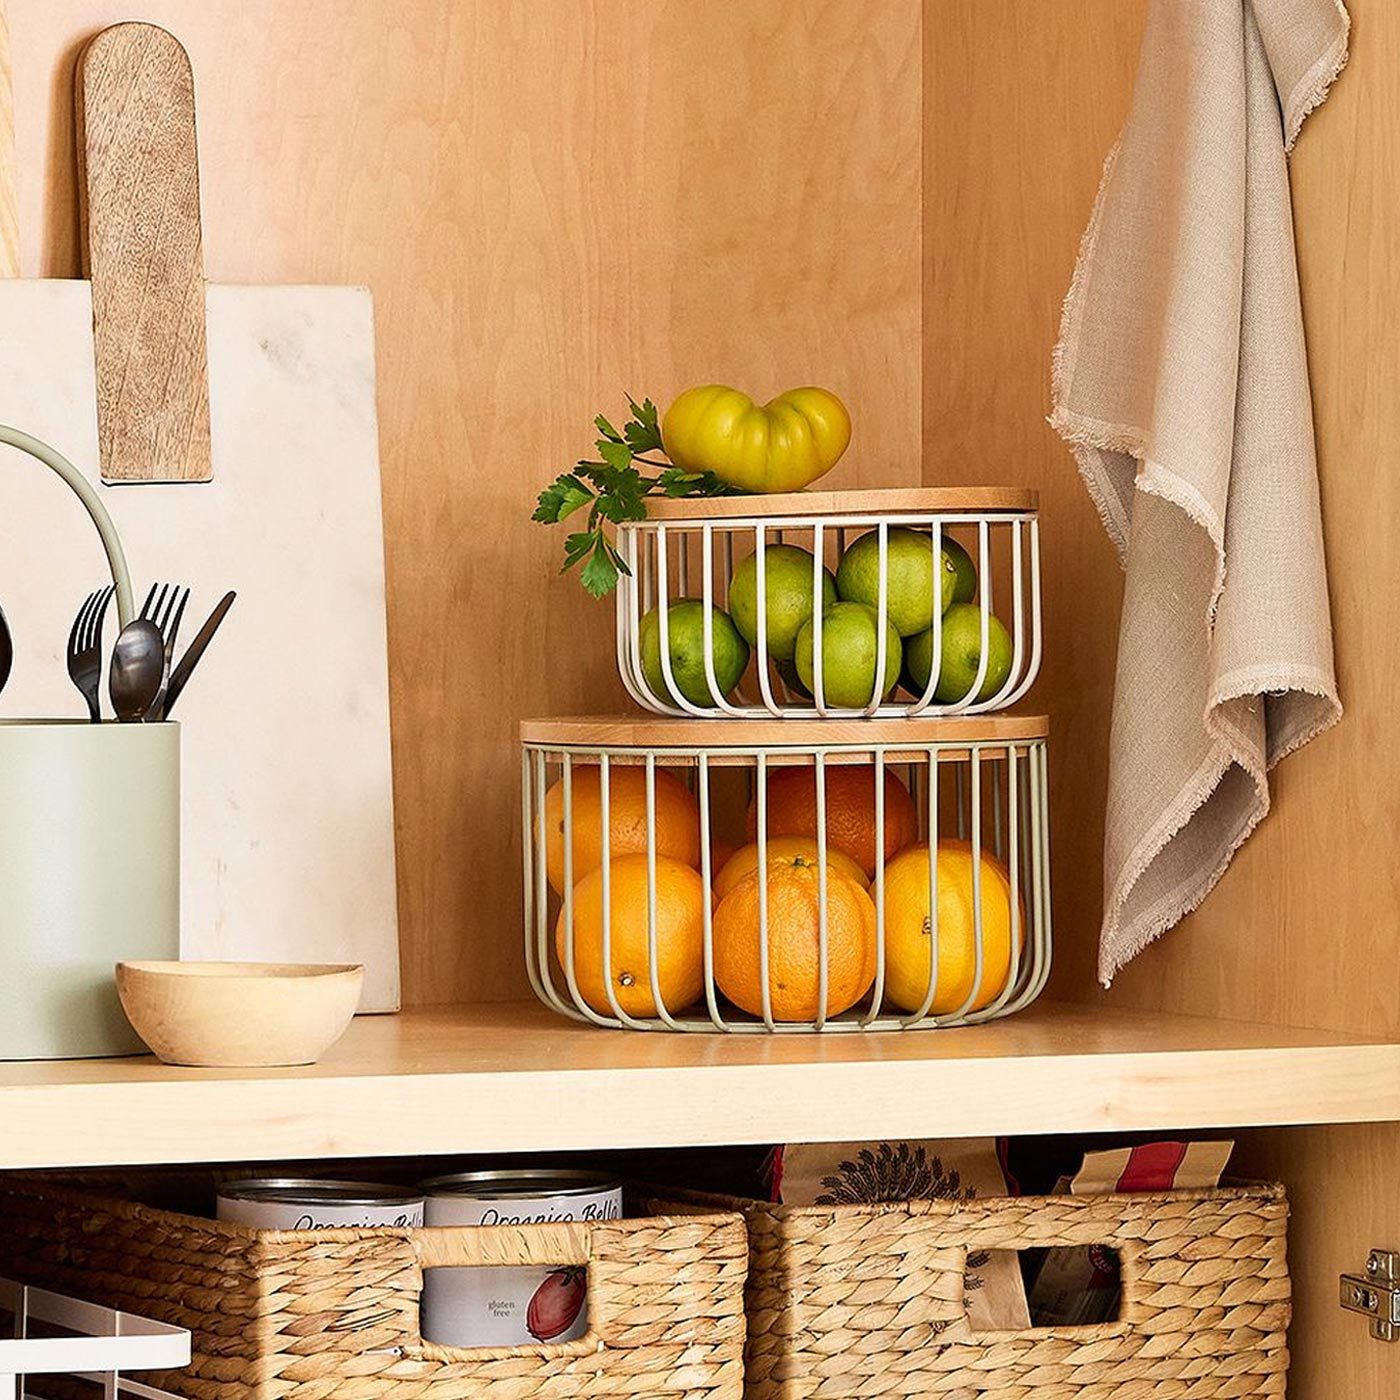 Vegetable storage: How to store fruits and vegetables properly